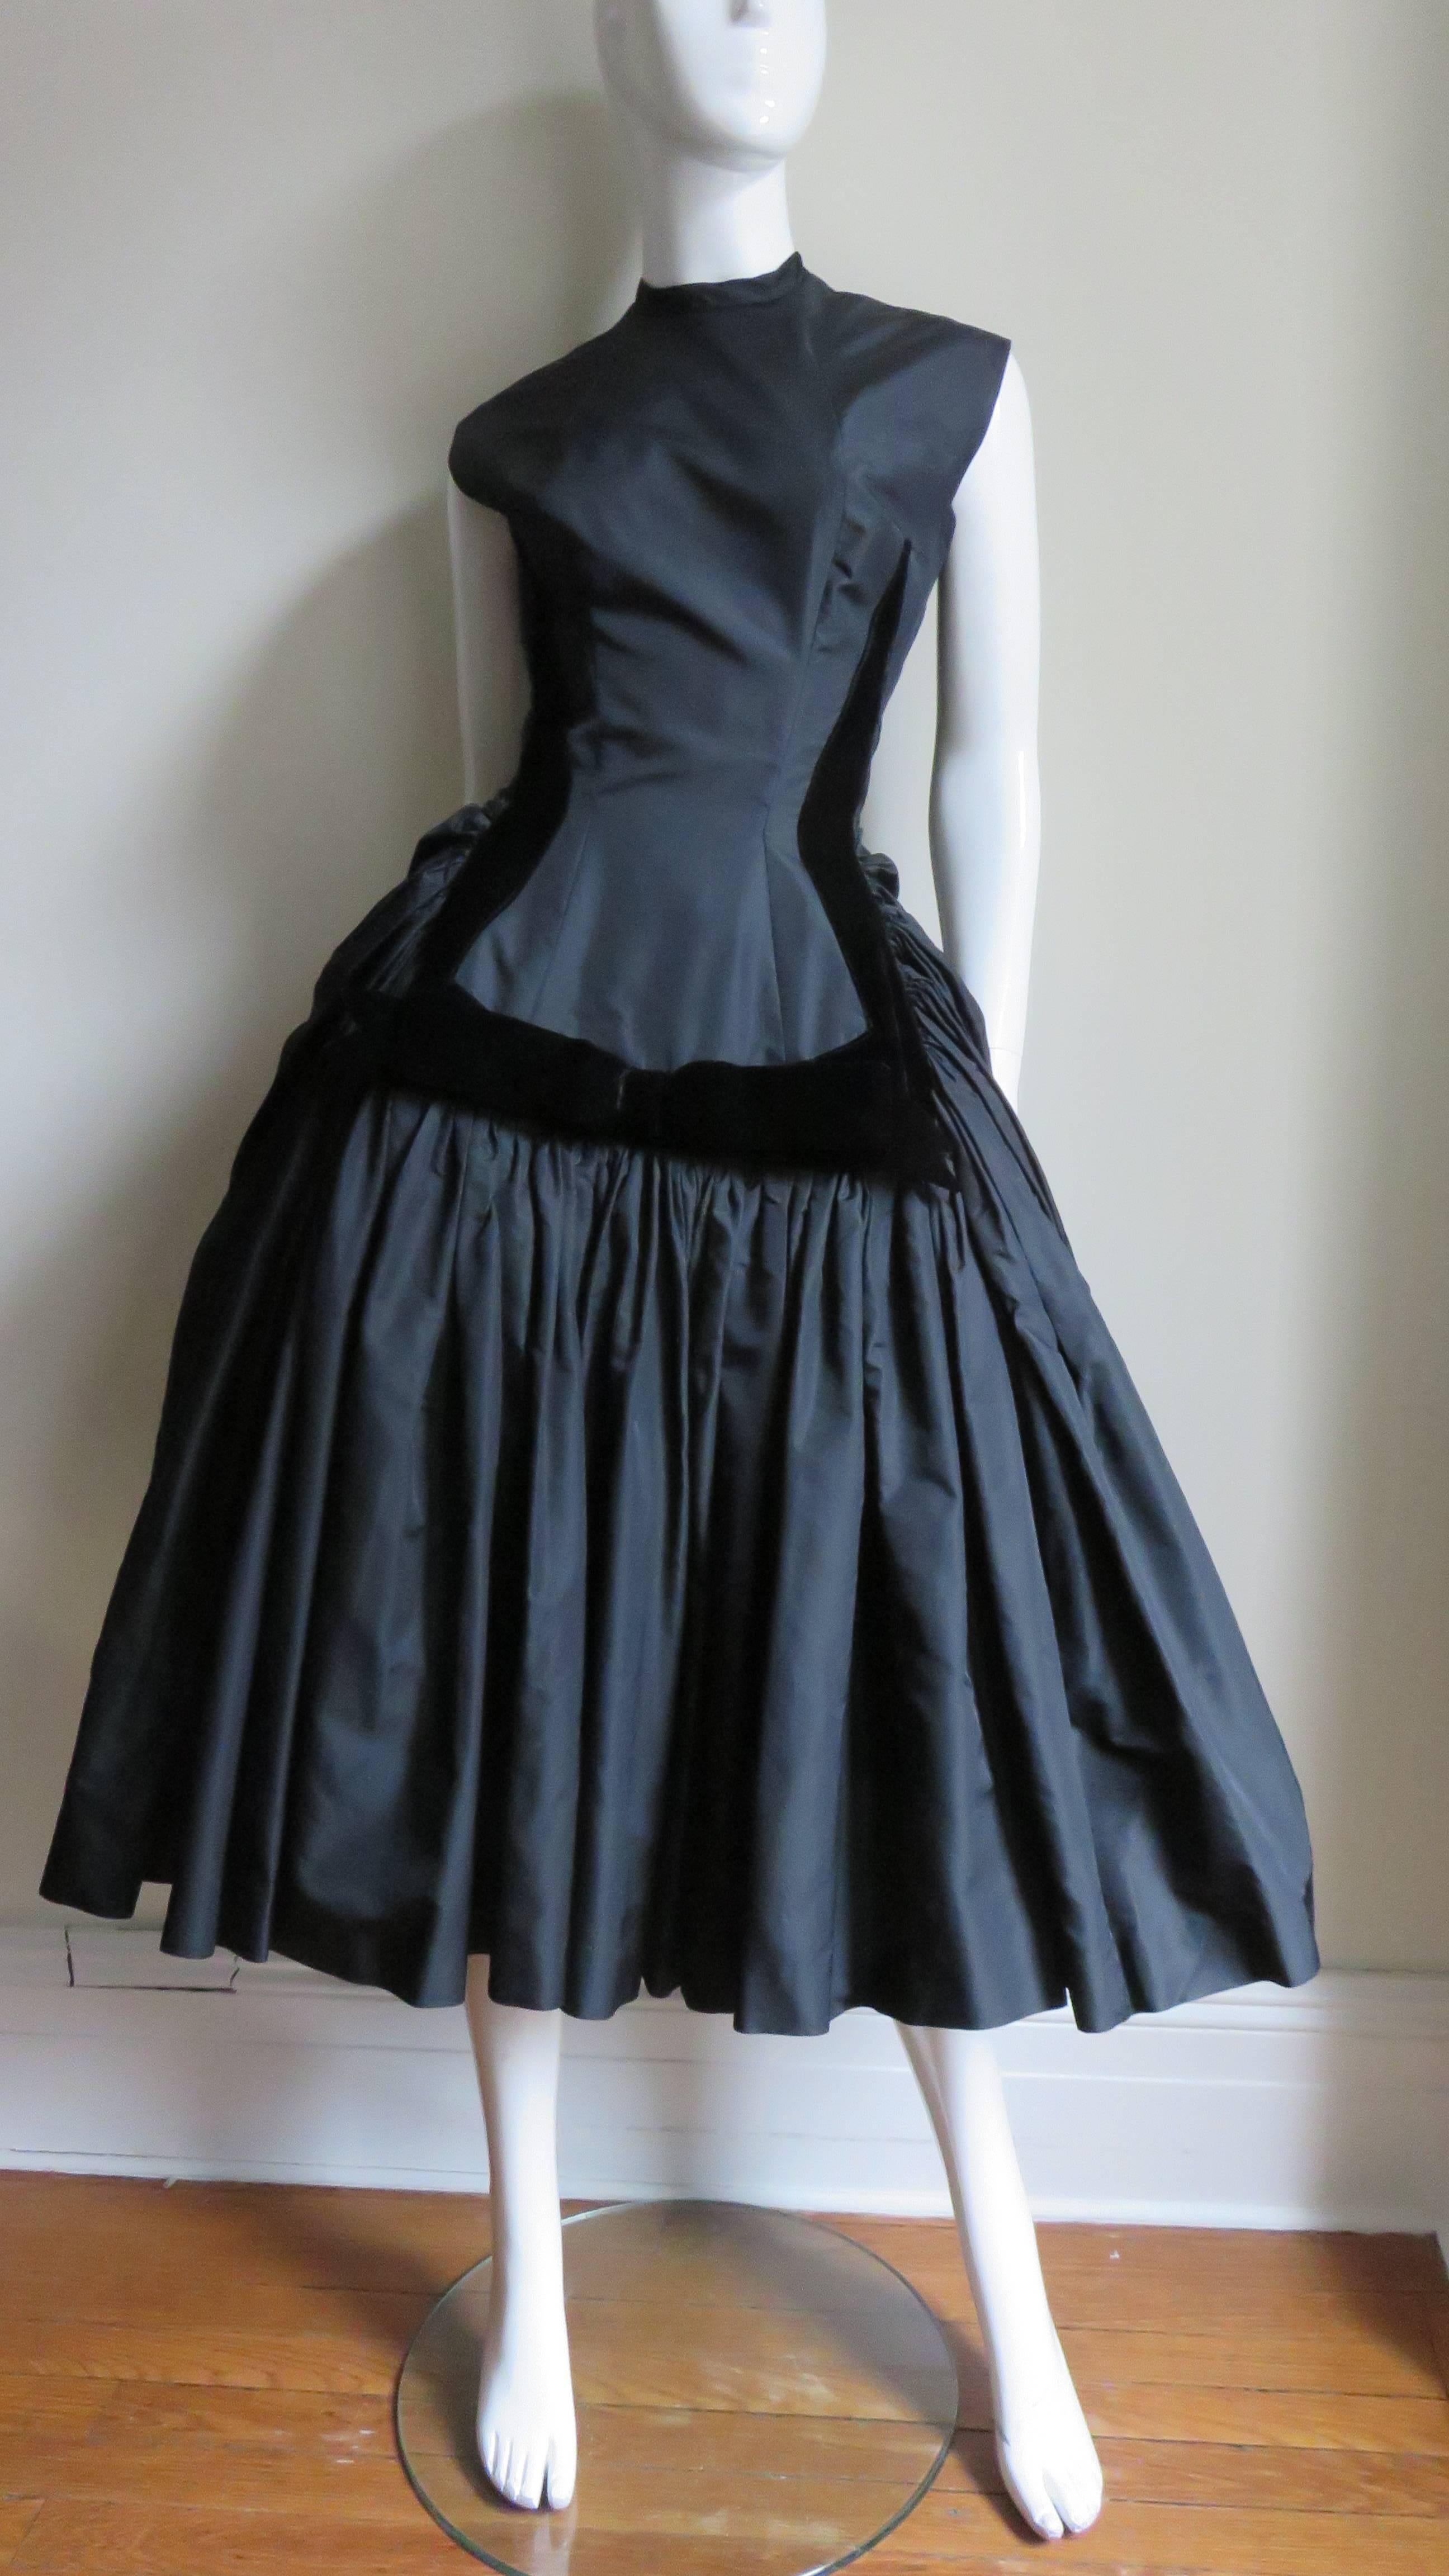 A fabulous black silk 1950s dress from Neusteters.  It is sleeveless with a fitted bodice, a crew neck, and a full gathered skirt. The front skirt panel is framed with black silk velvet. It is absolutely gorgeous!  It has a painted metal back zipper